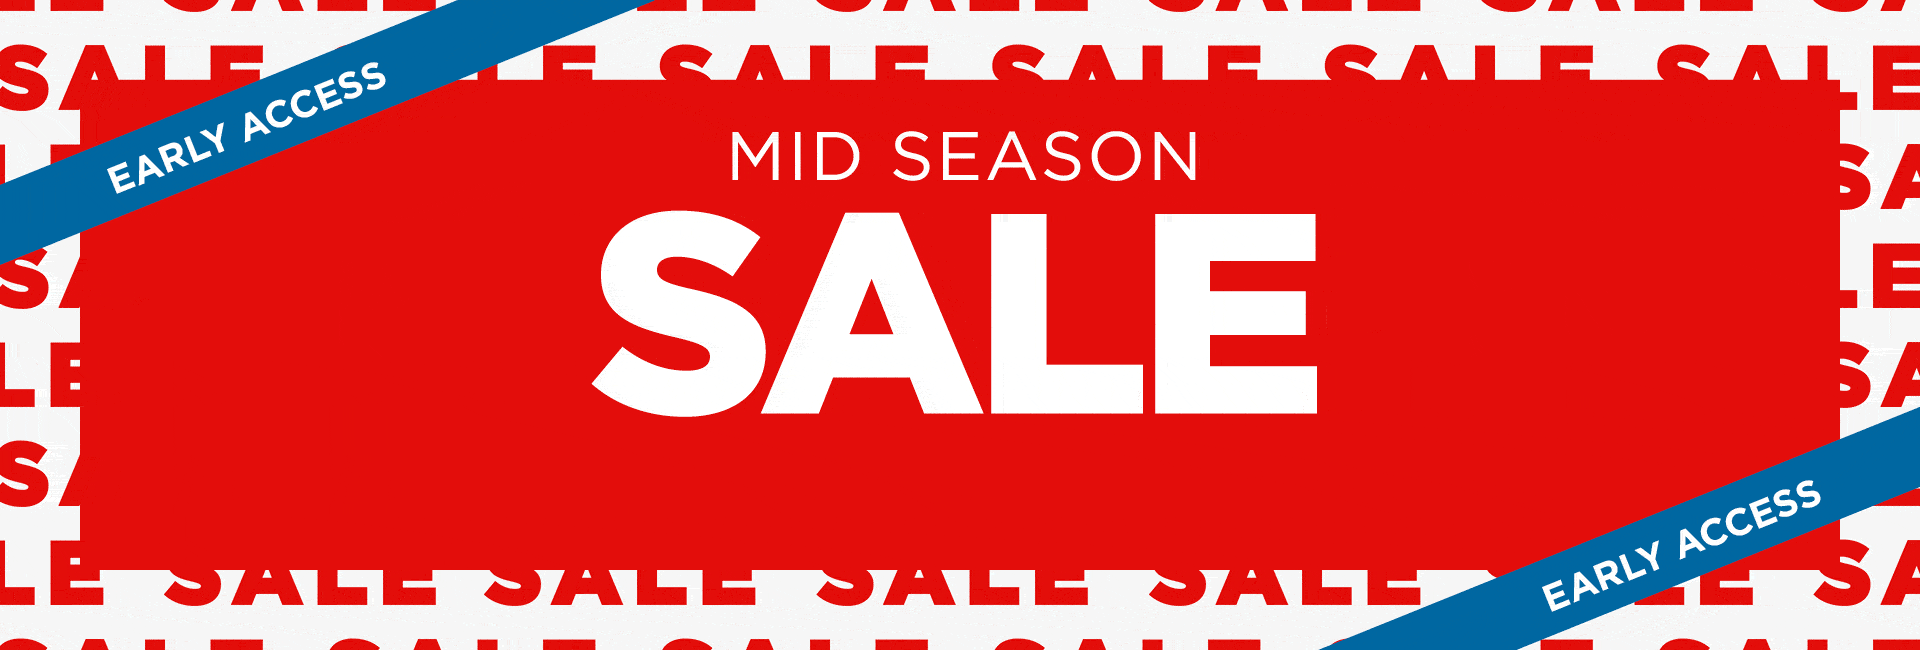 Skechers Mid Season sale - Save up to 50% OFF selected styles